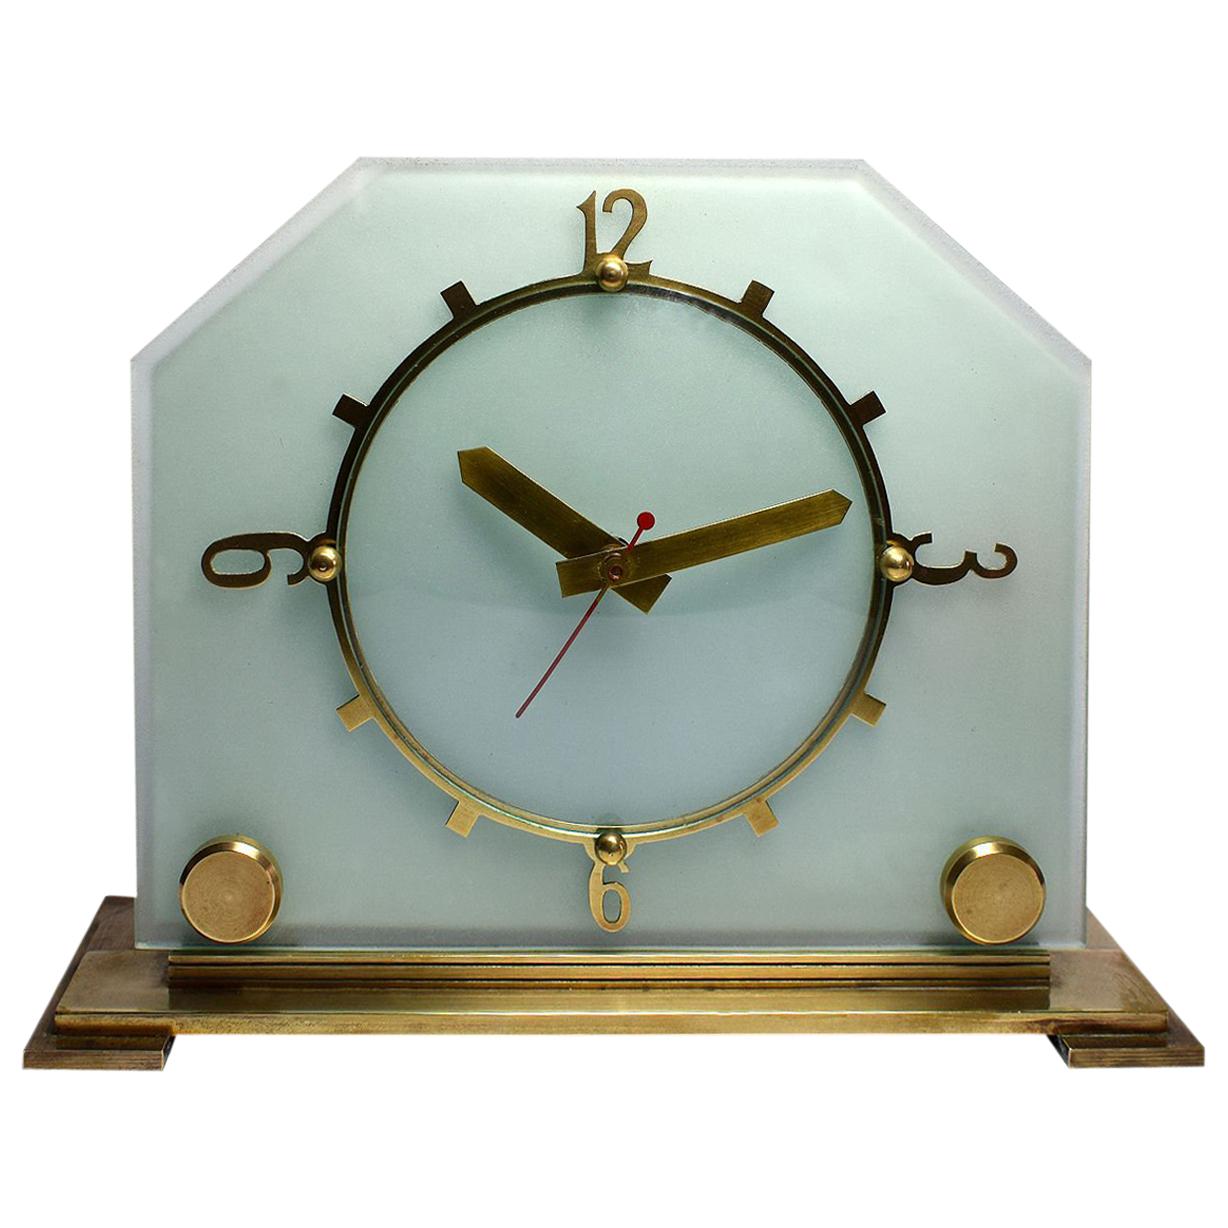 Art Deco at it's finest. Thick glass panel provides the back drop to the dial face, the dial hands, numerals and plinth are all solid brass. All totally original. Condition is excellent there are no flaws to mention. All the brass work is original,